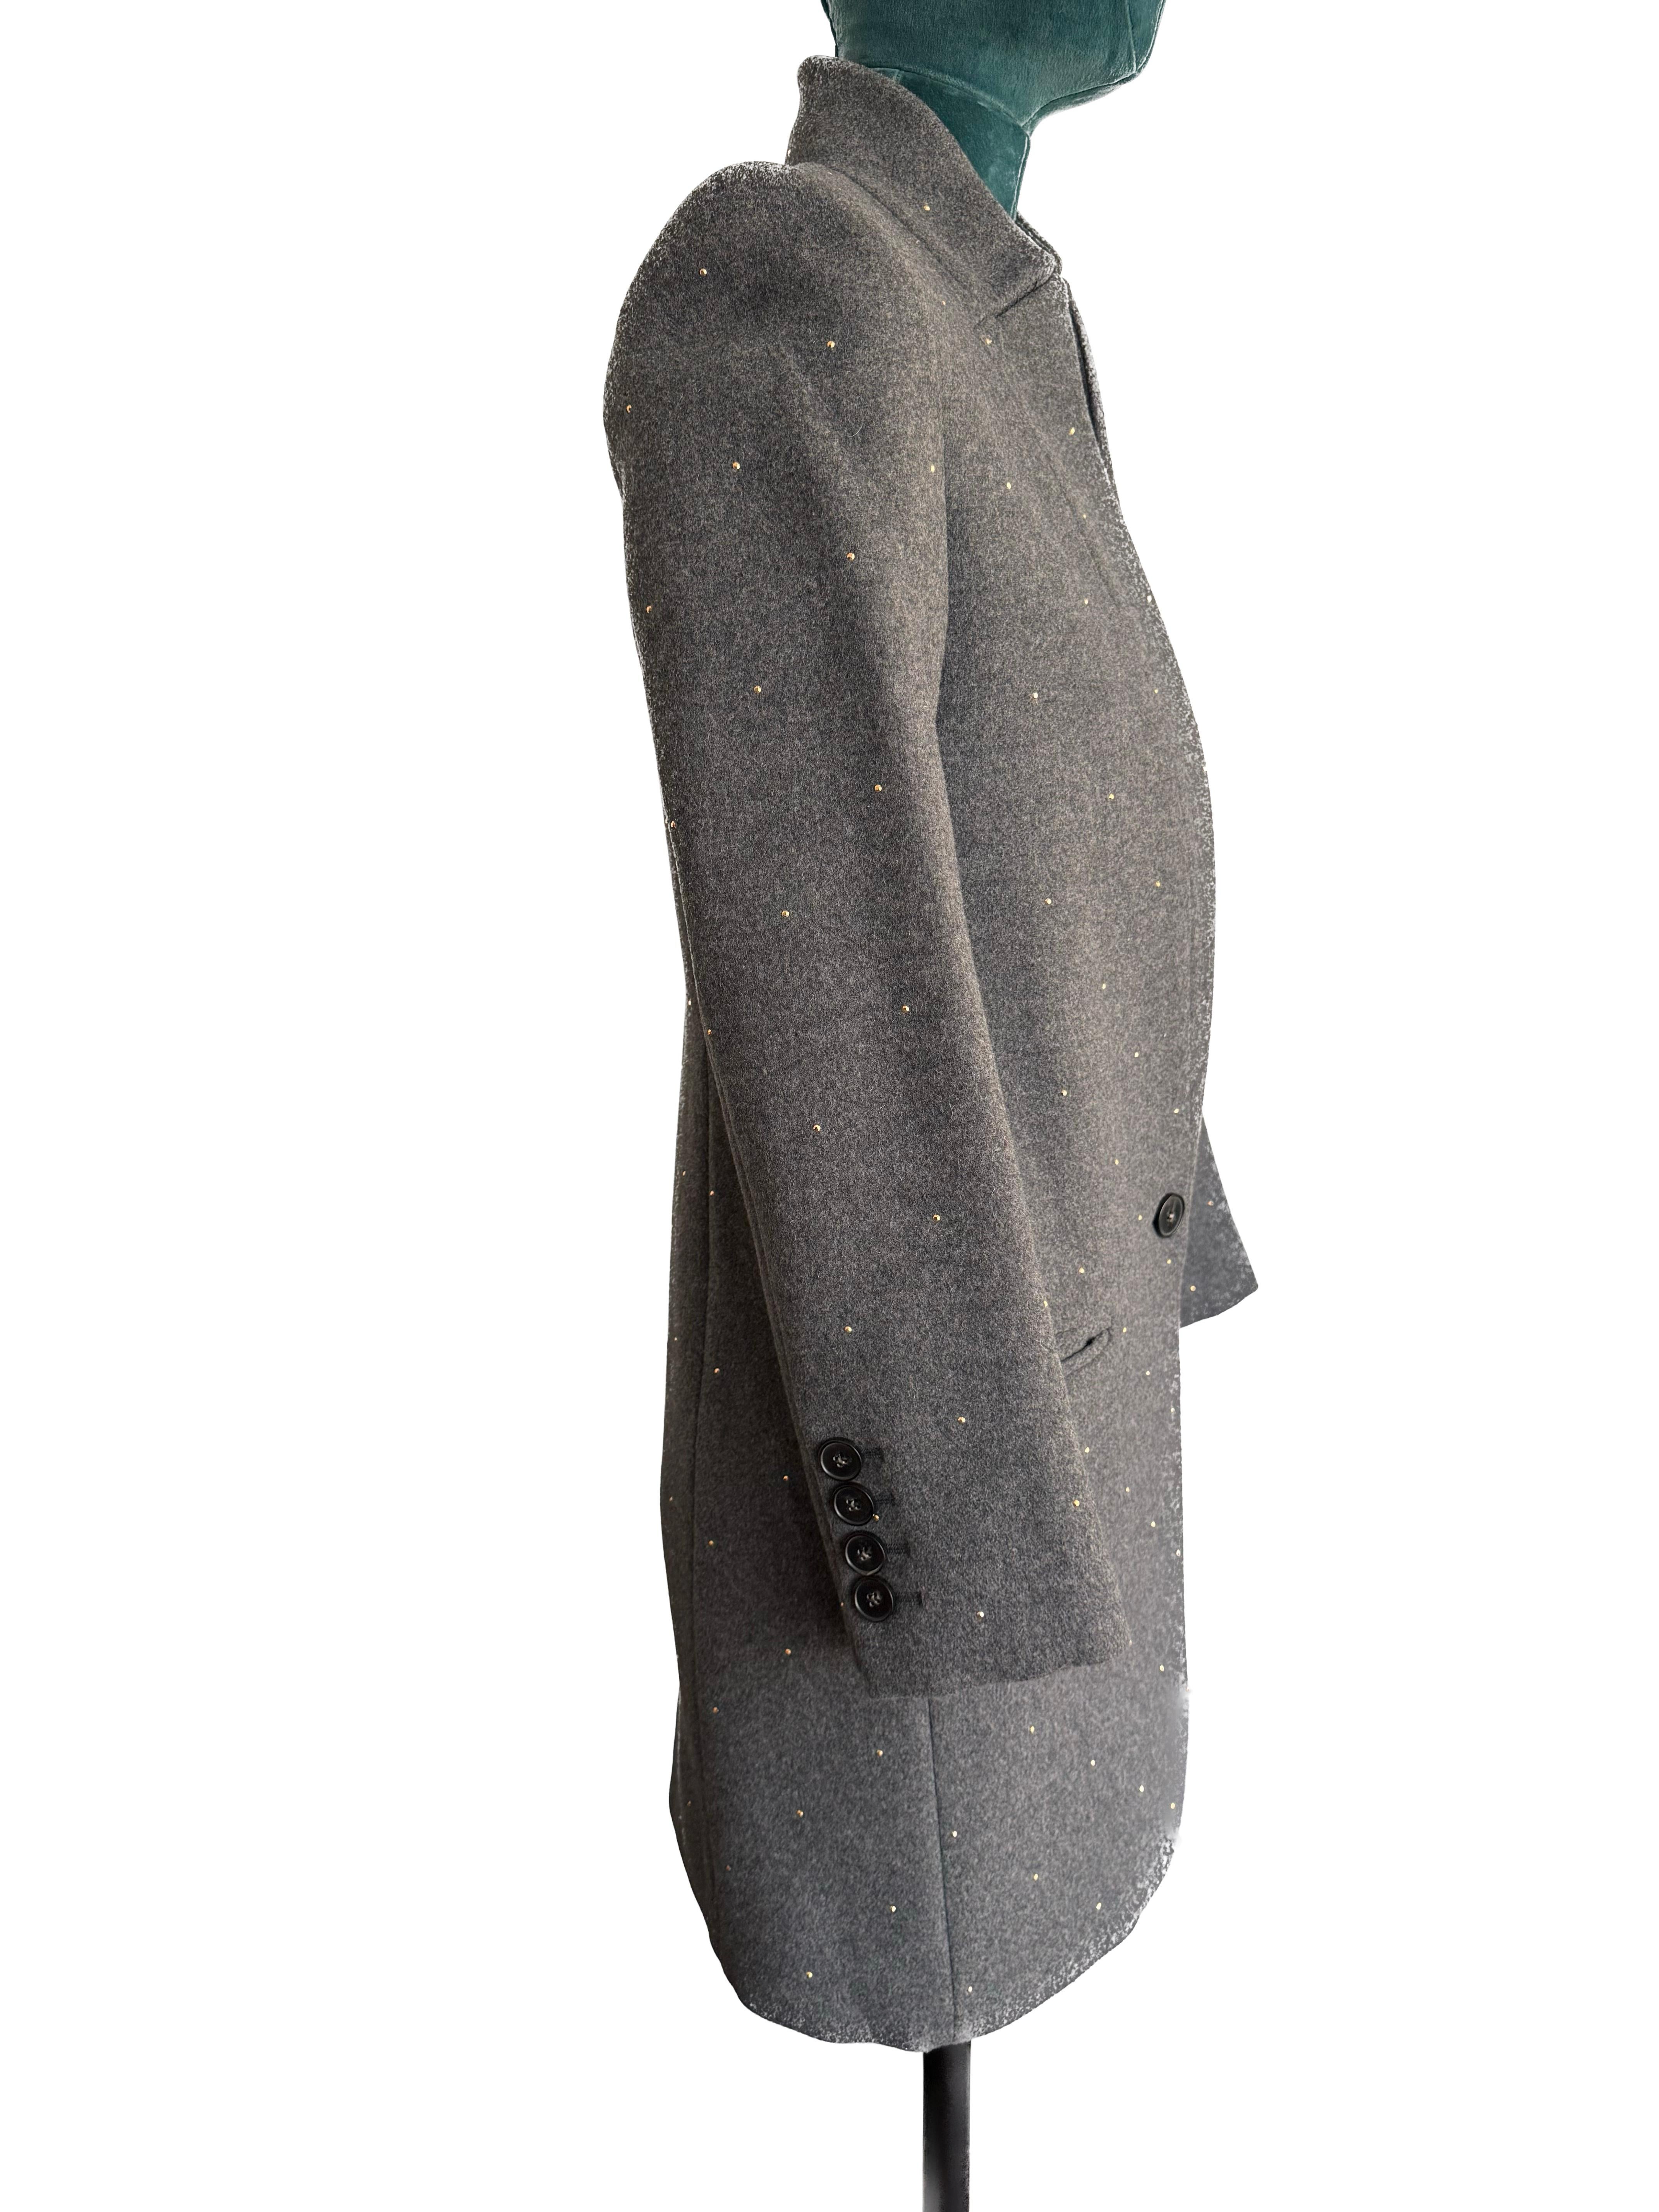 Introducing the Stella McCartney Grey Wool Blend Cashmere Mid-Length Blazer Jacket – a sartorial masterpiece that seamlessly blends modern luxury with classic British equestrian influences. This exquisite piece, in excellent condition, is a